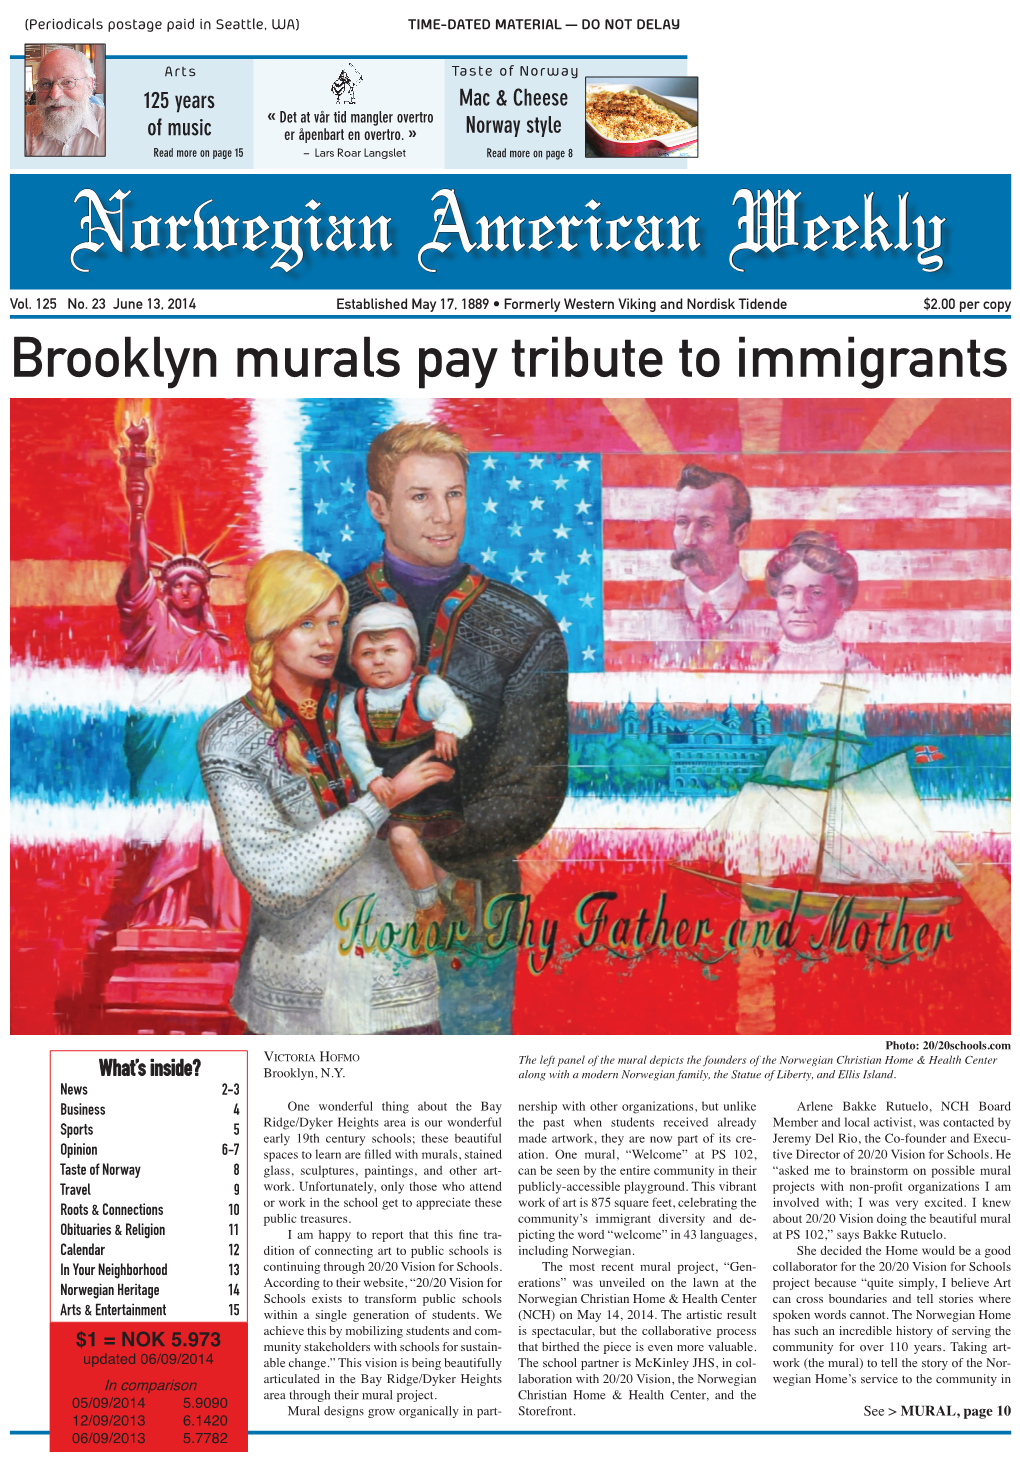 Brooklyn Murals Pay Tribute to Immigrants